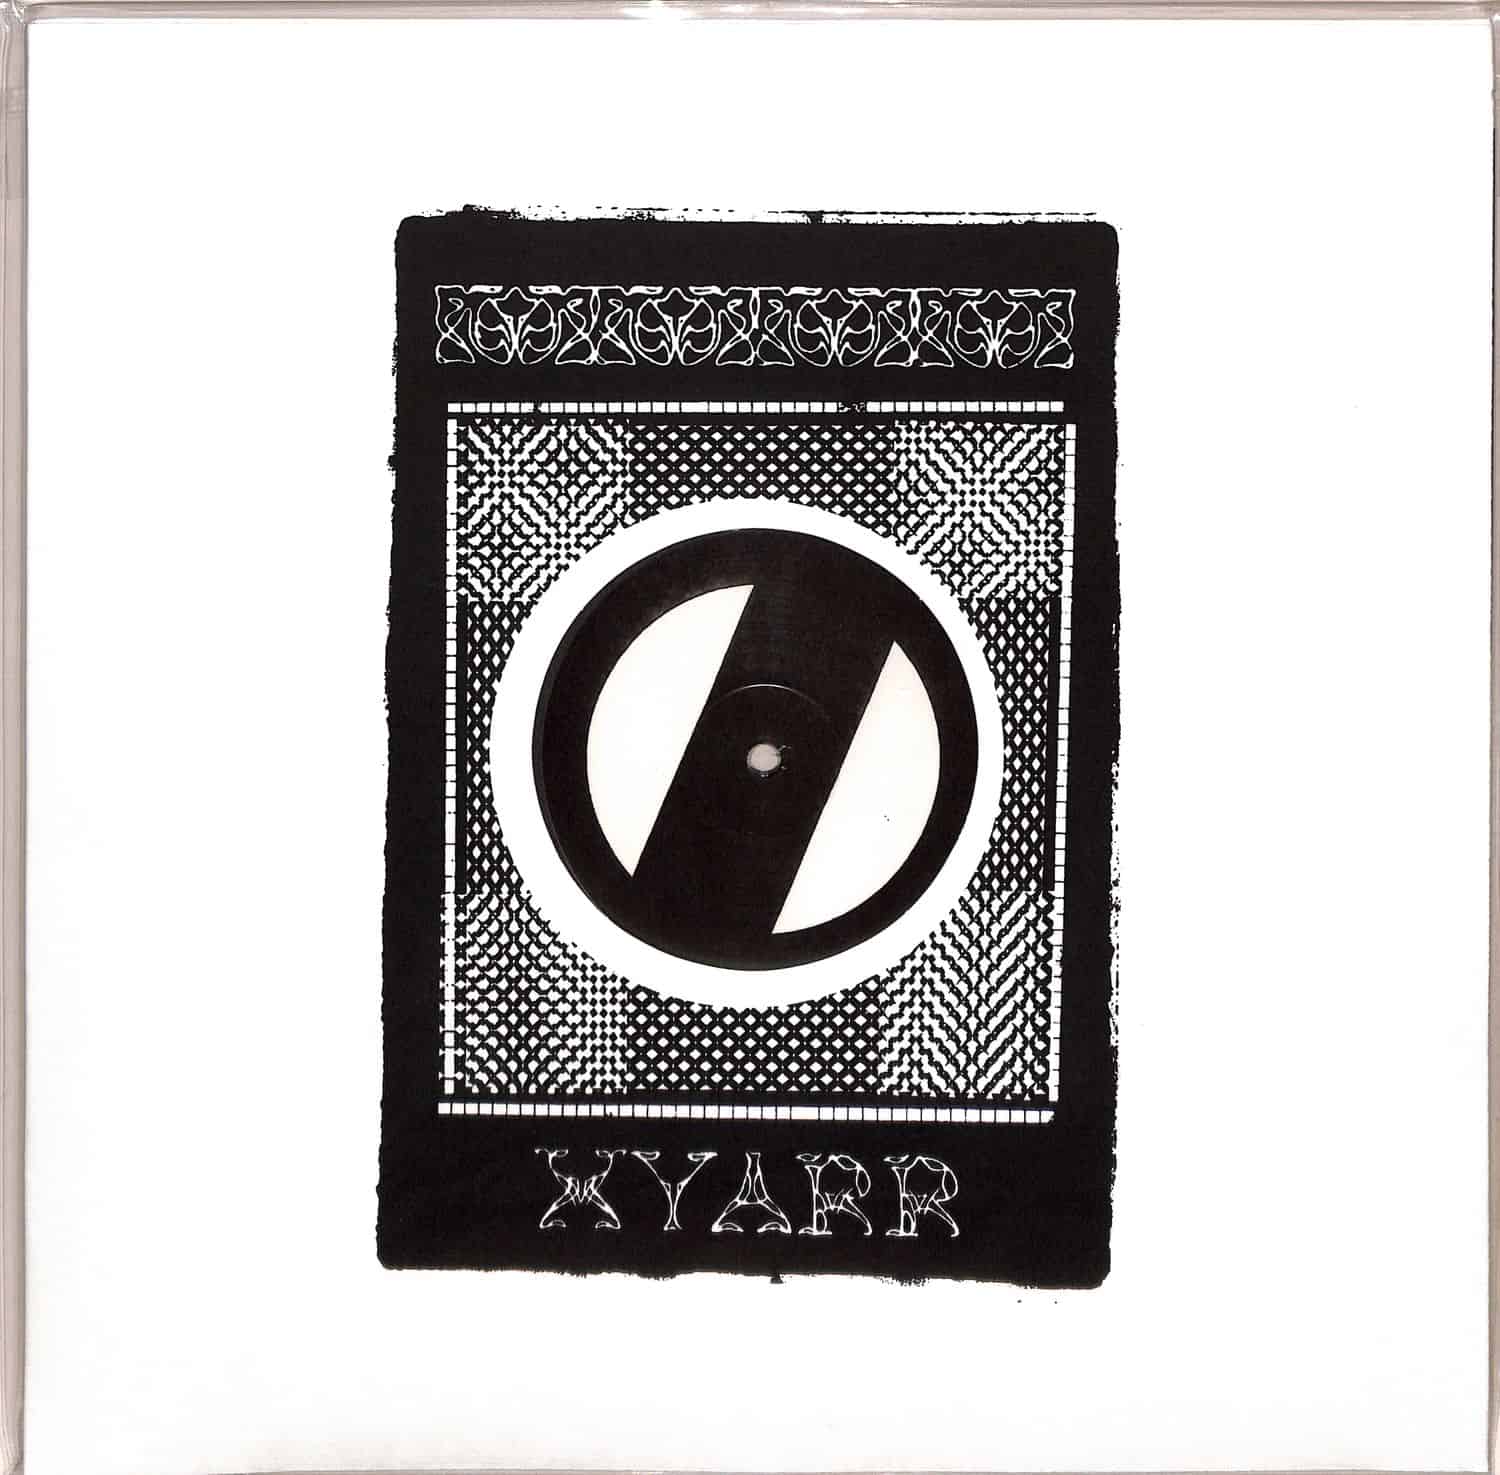 Xvarr - TRANSITIONAL BEING 